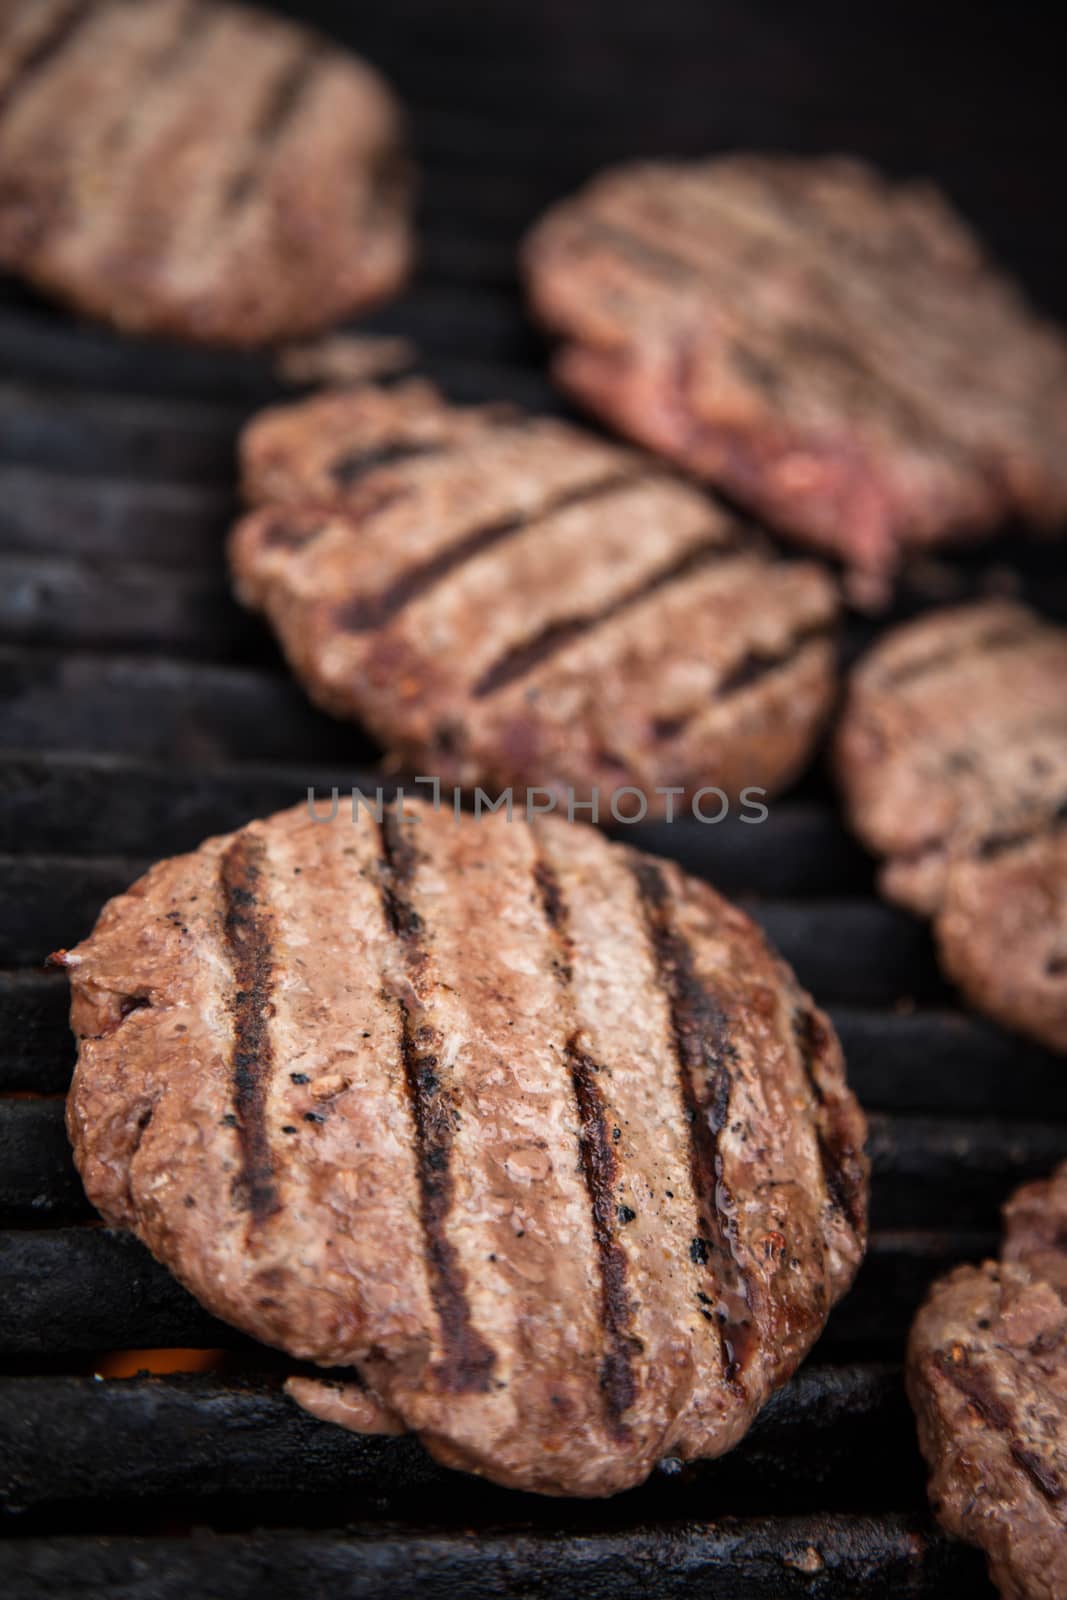 Hamburgers cooking on the BBQ grill